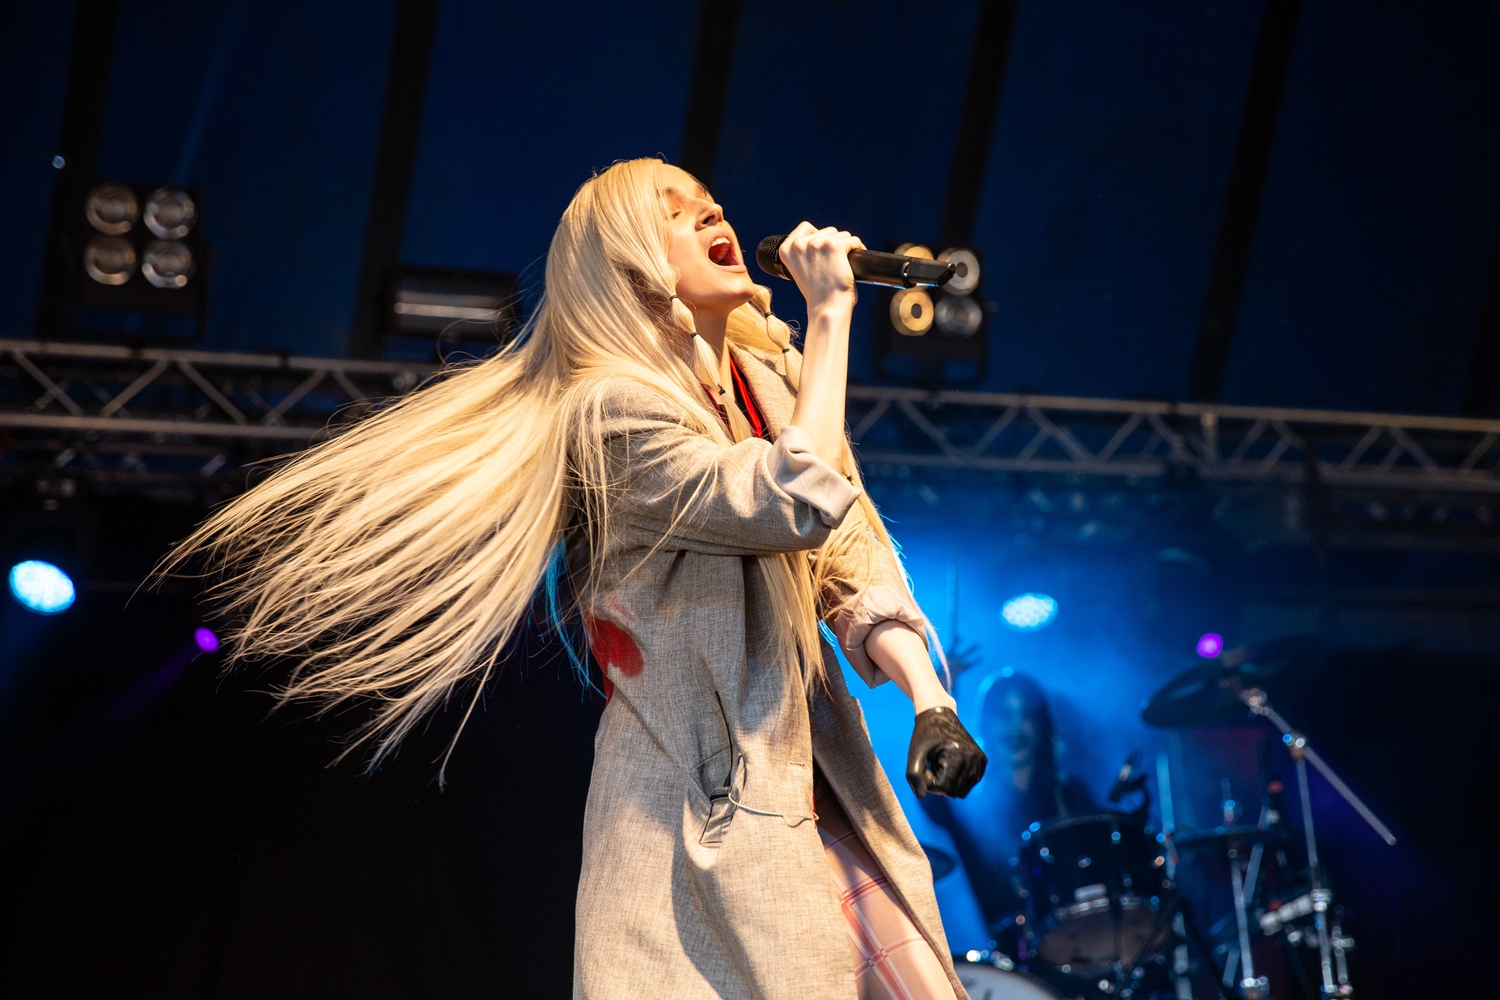 Billie Eilish rules Day 2 of Reading 2019